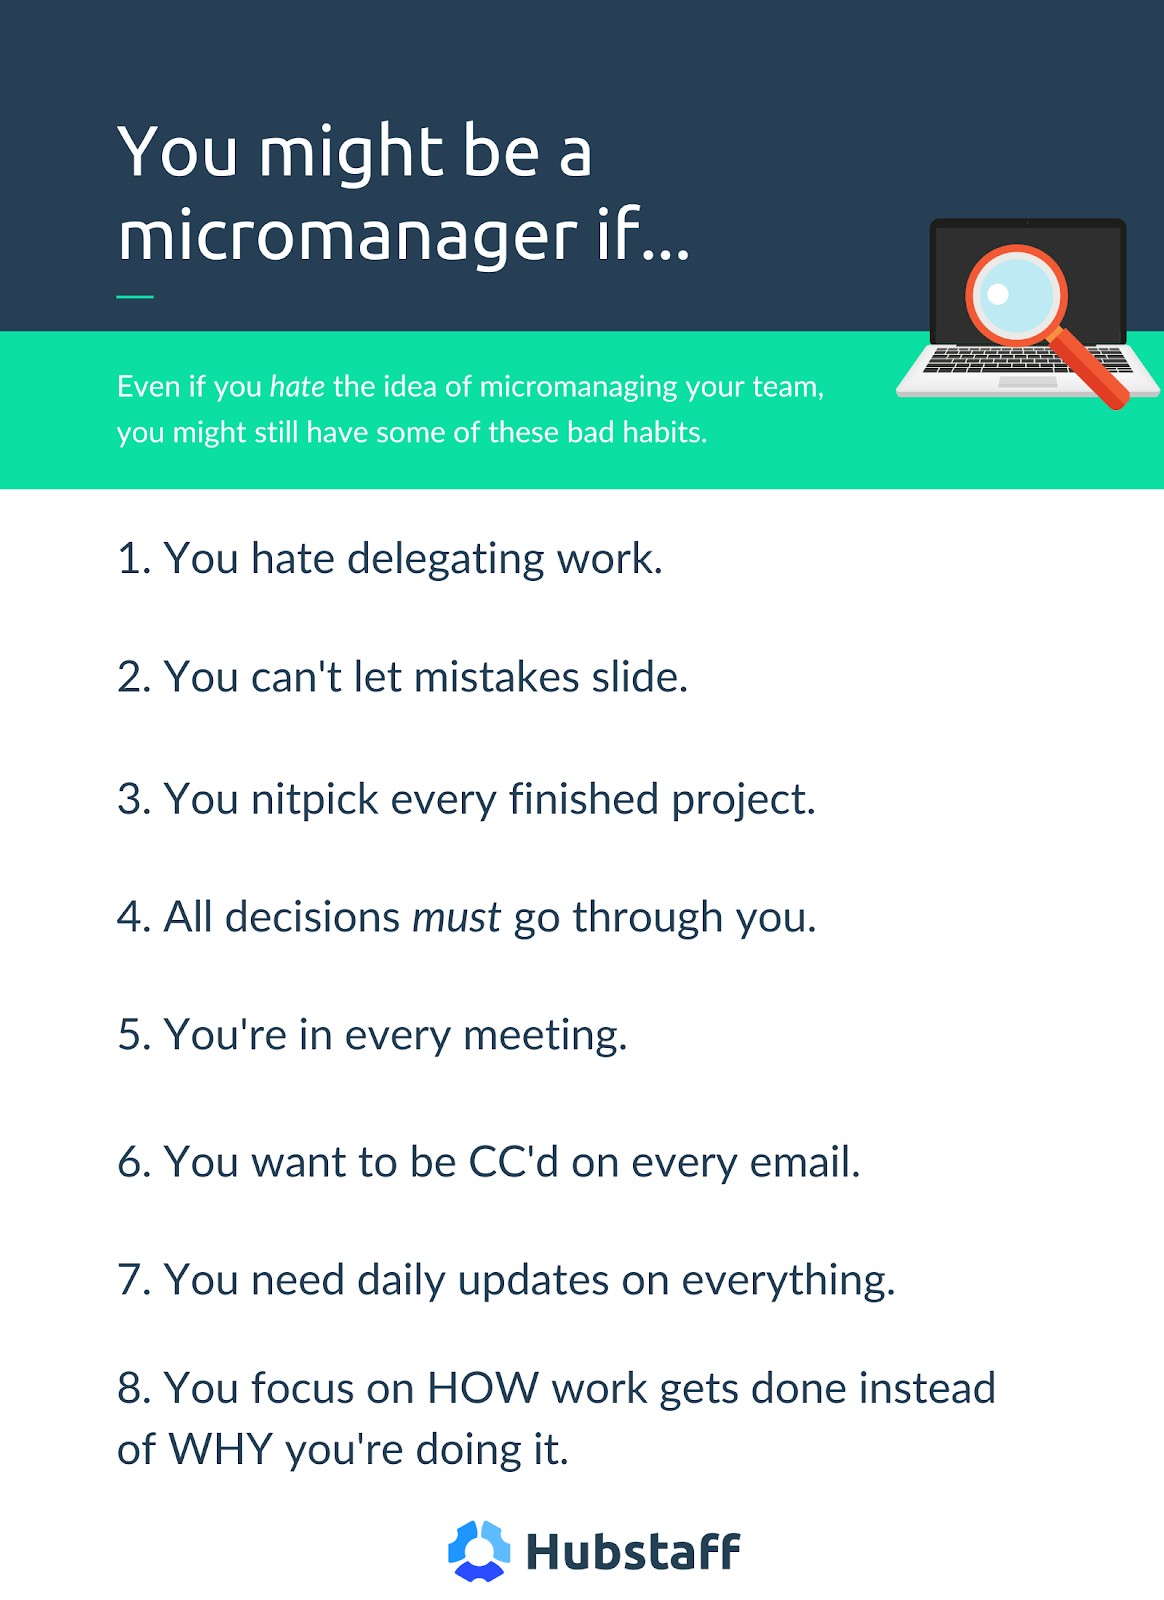 Signs of being a micromanager